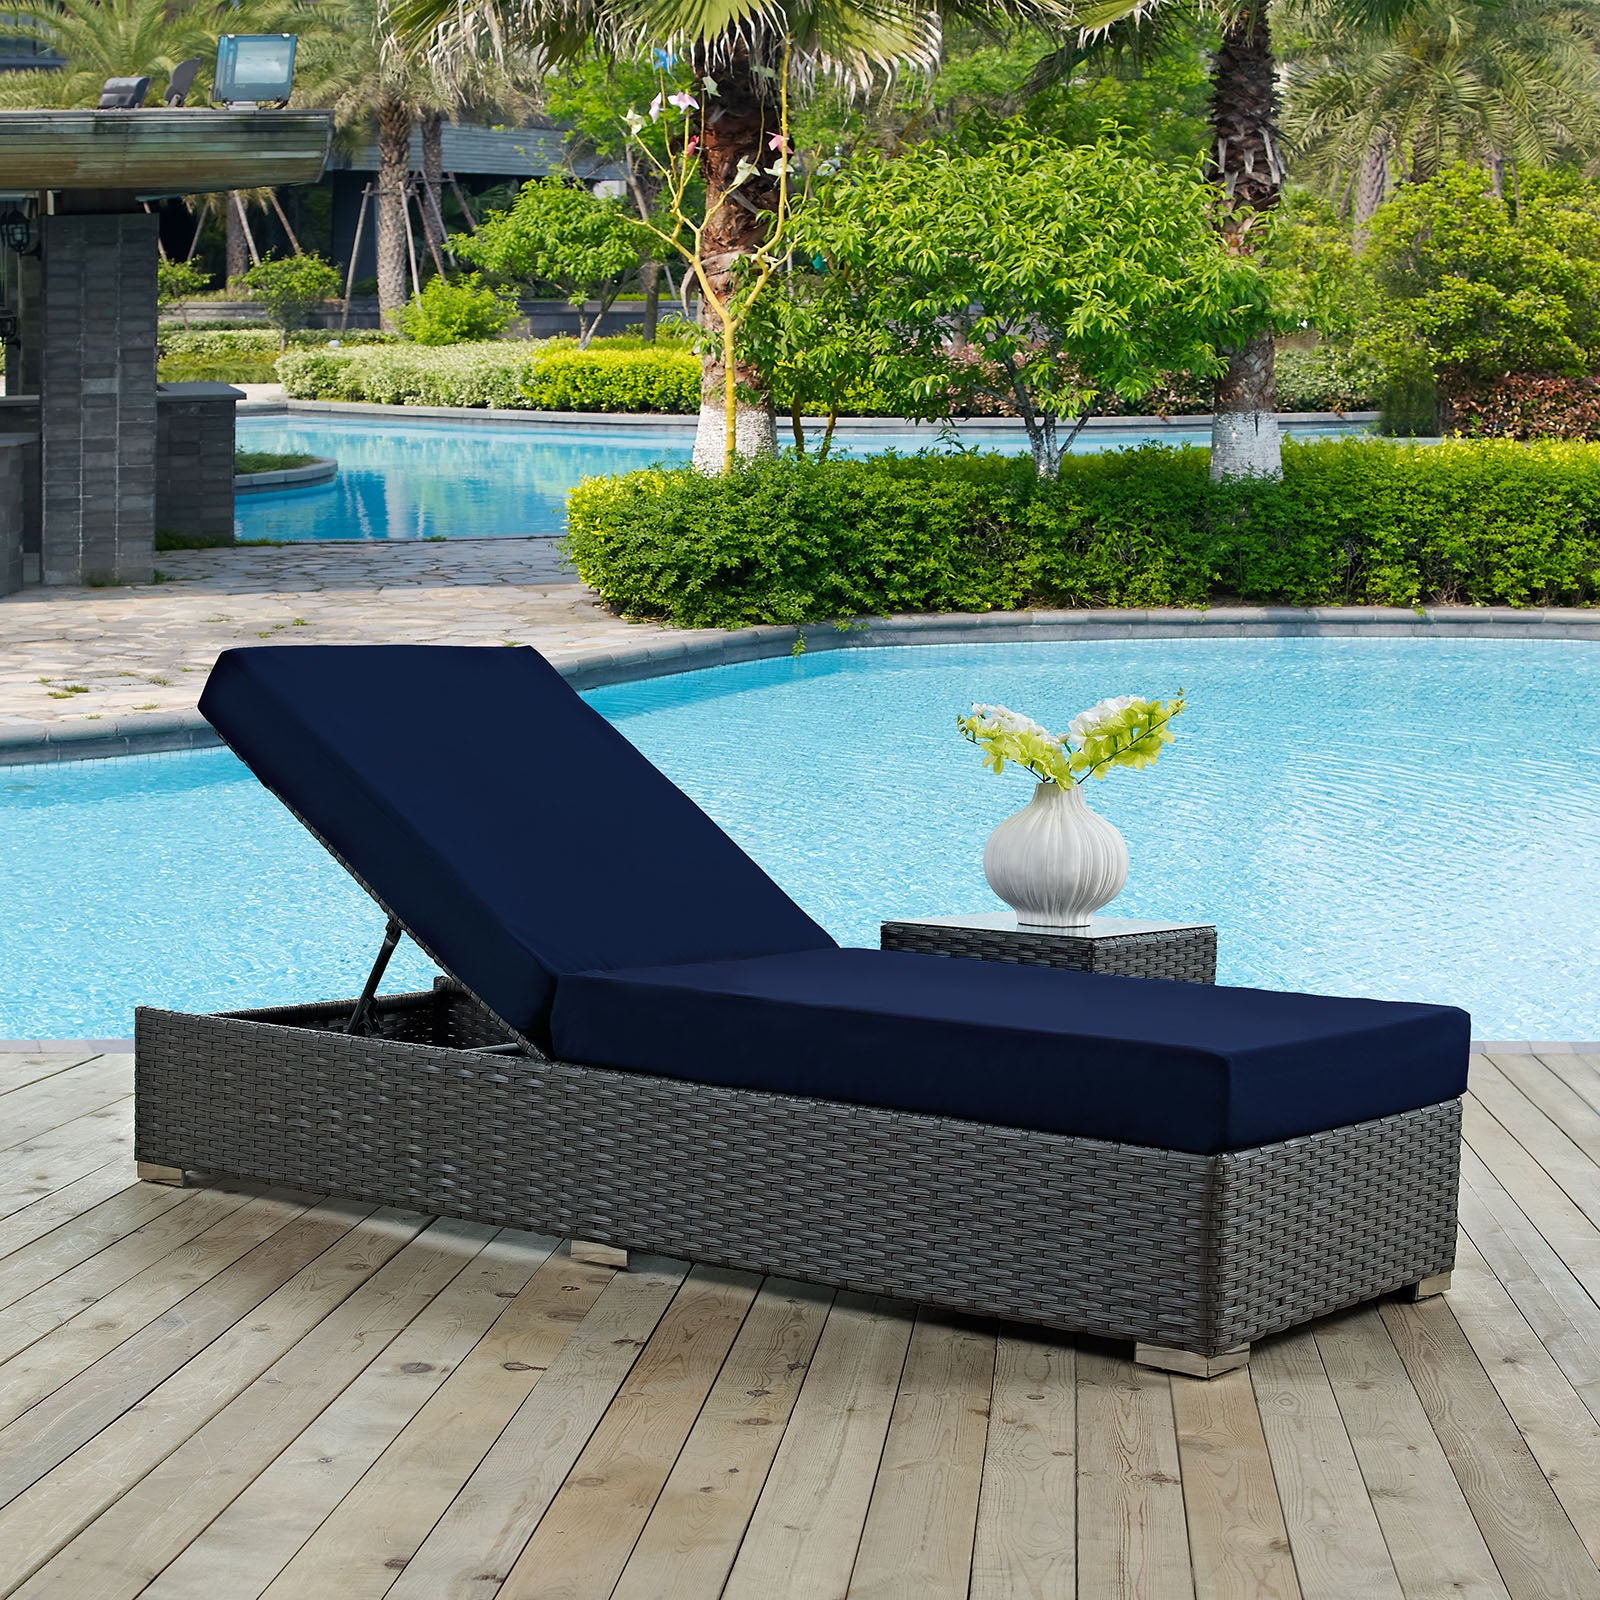 Modway Outdoor Loungers - Sojourn Outdoor Patio Sunbrella Chaise Lounge Canvas Navy